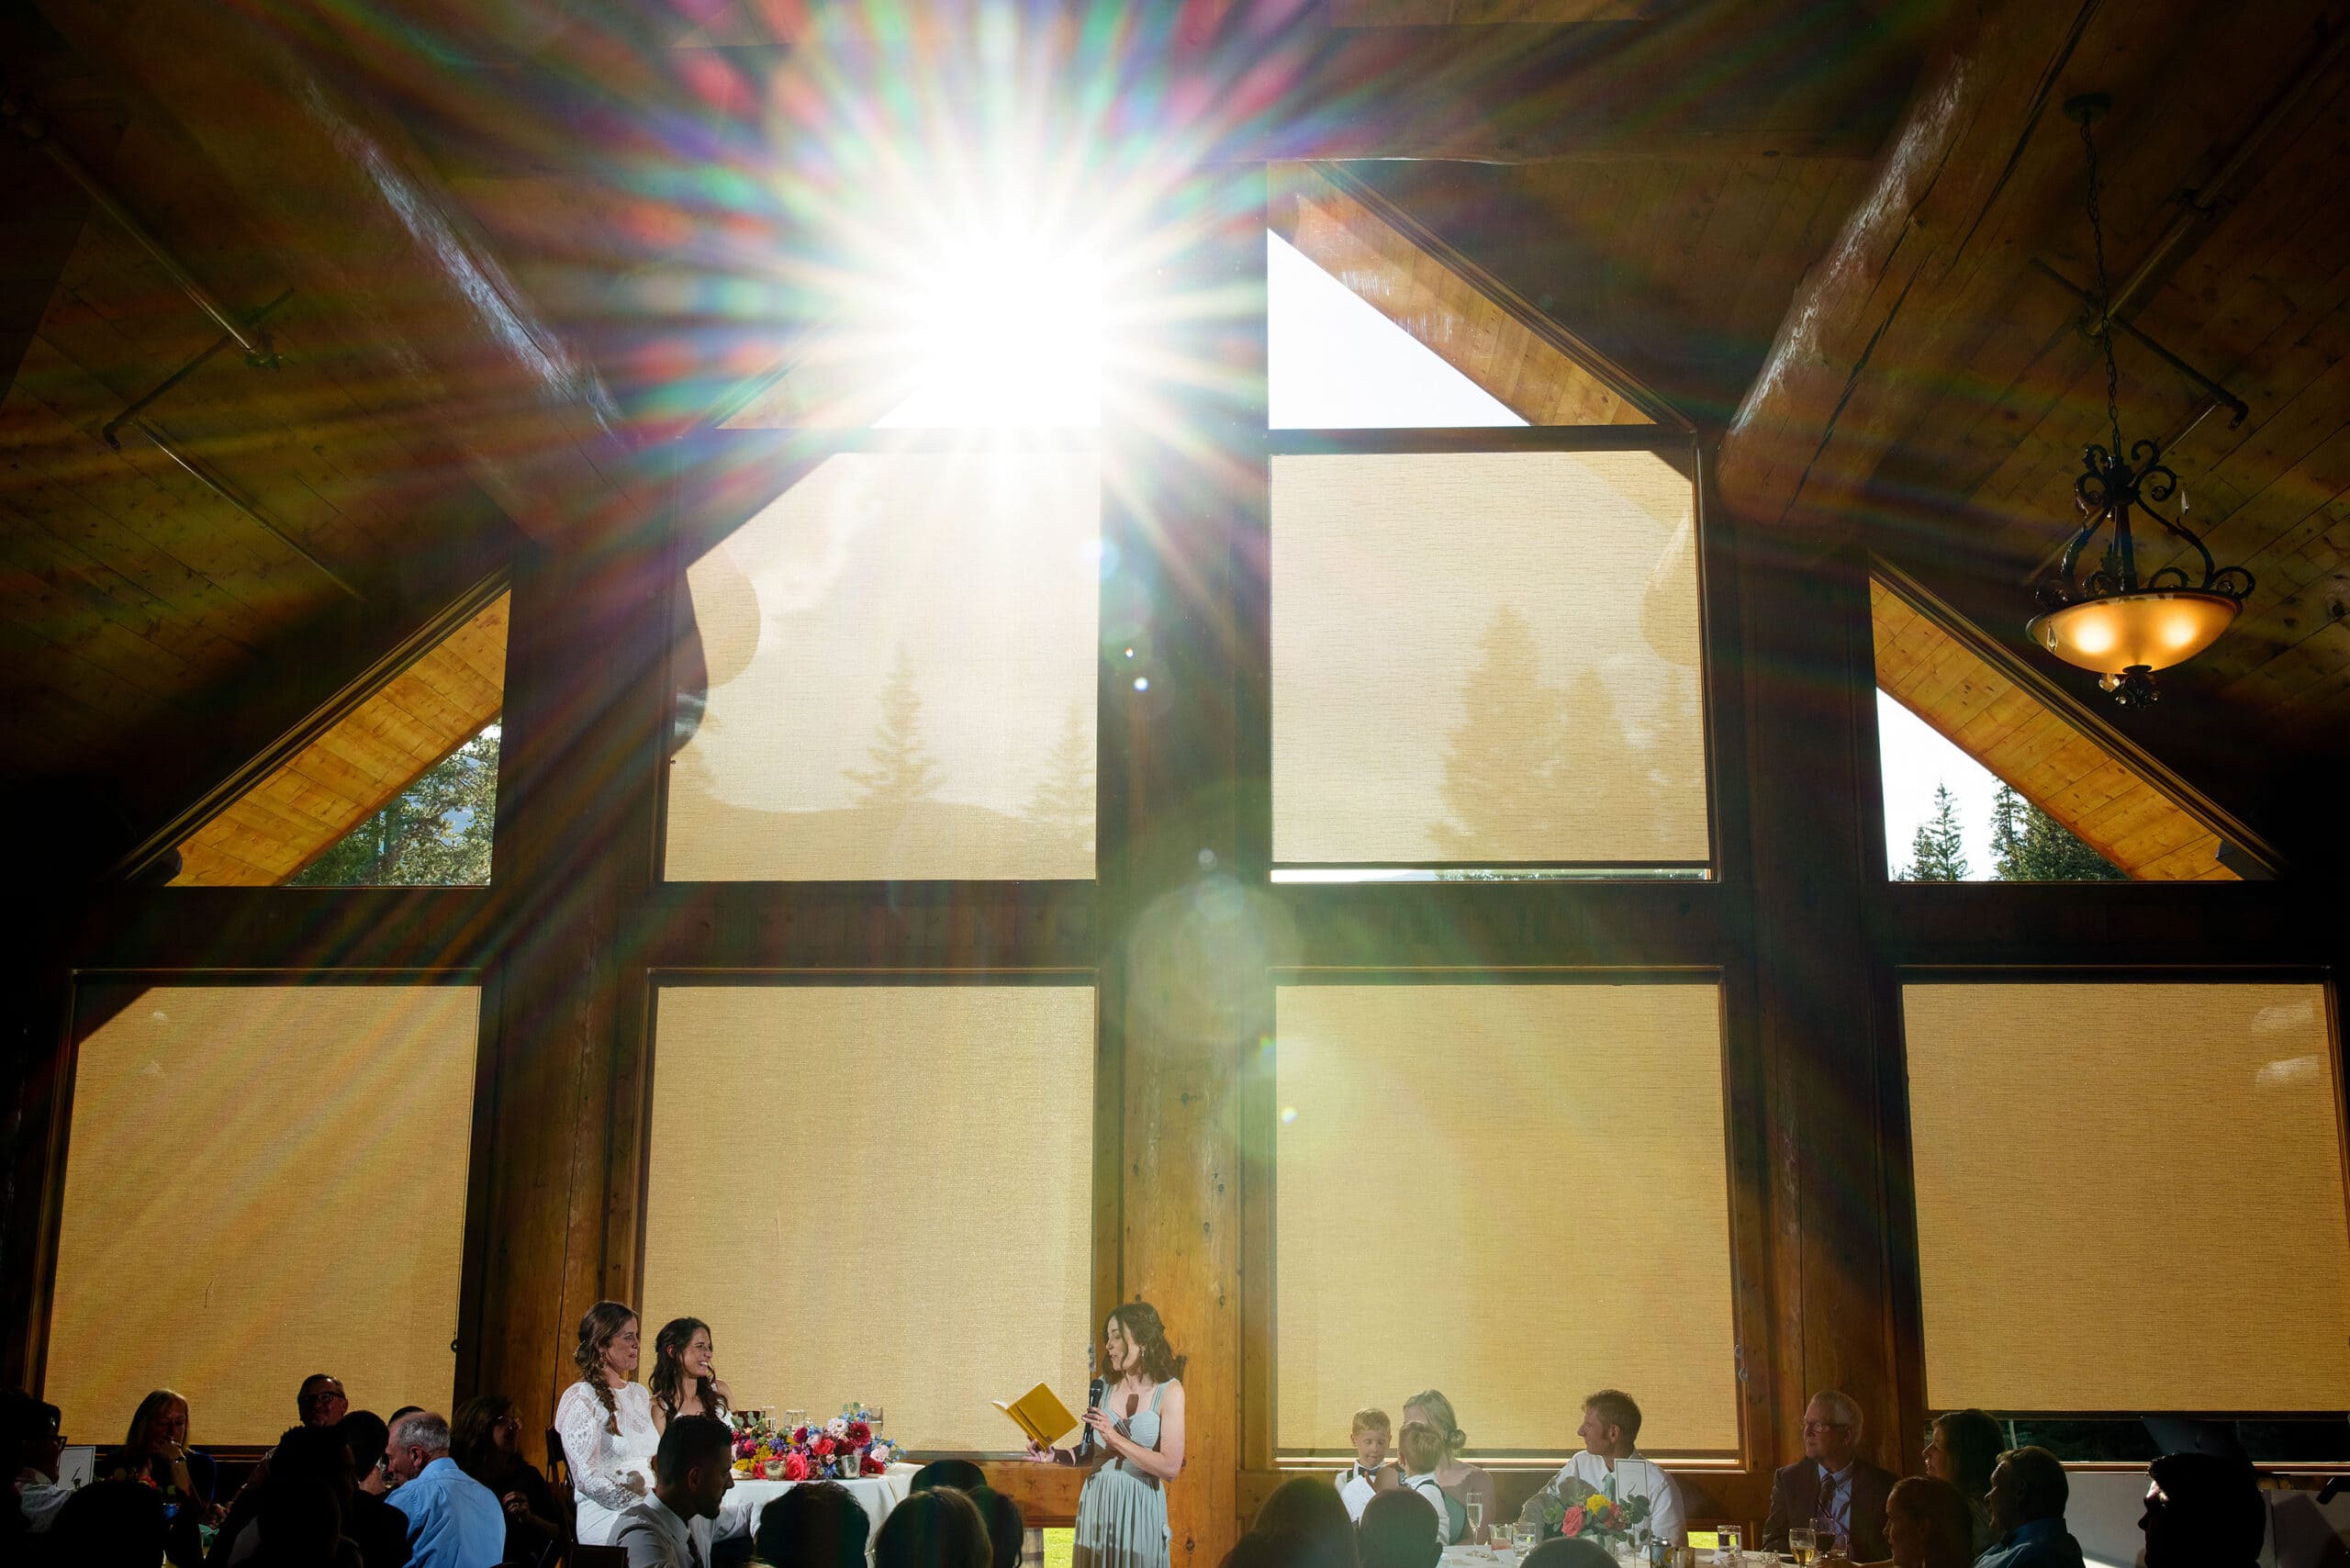 The suns shines through the windows as the maid of honor gives a toast